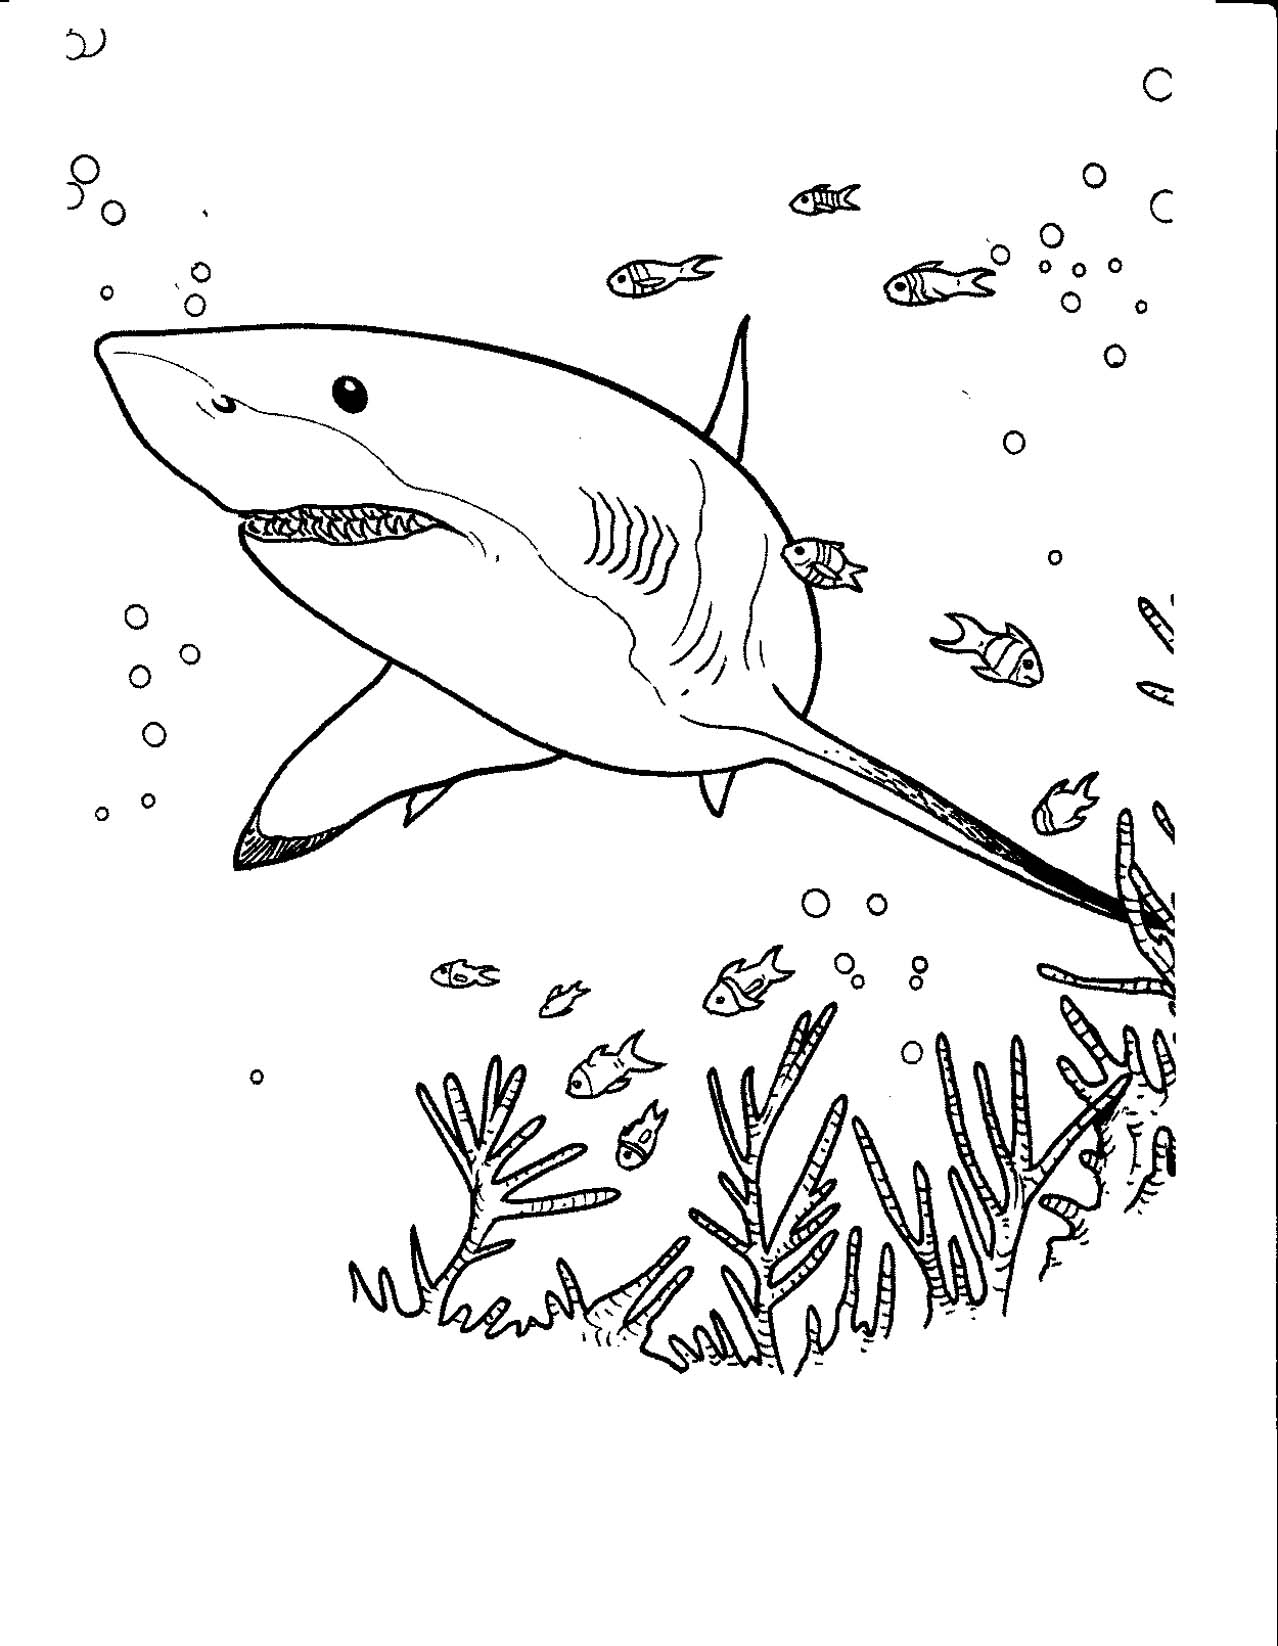 Shark surrounded by fish to print and color